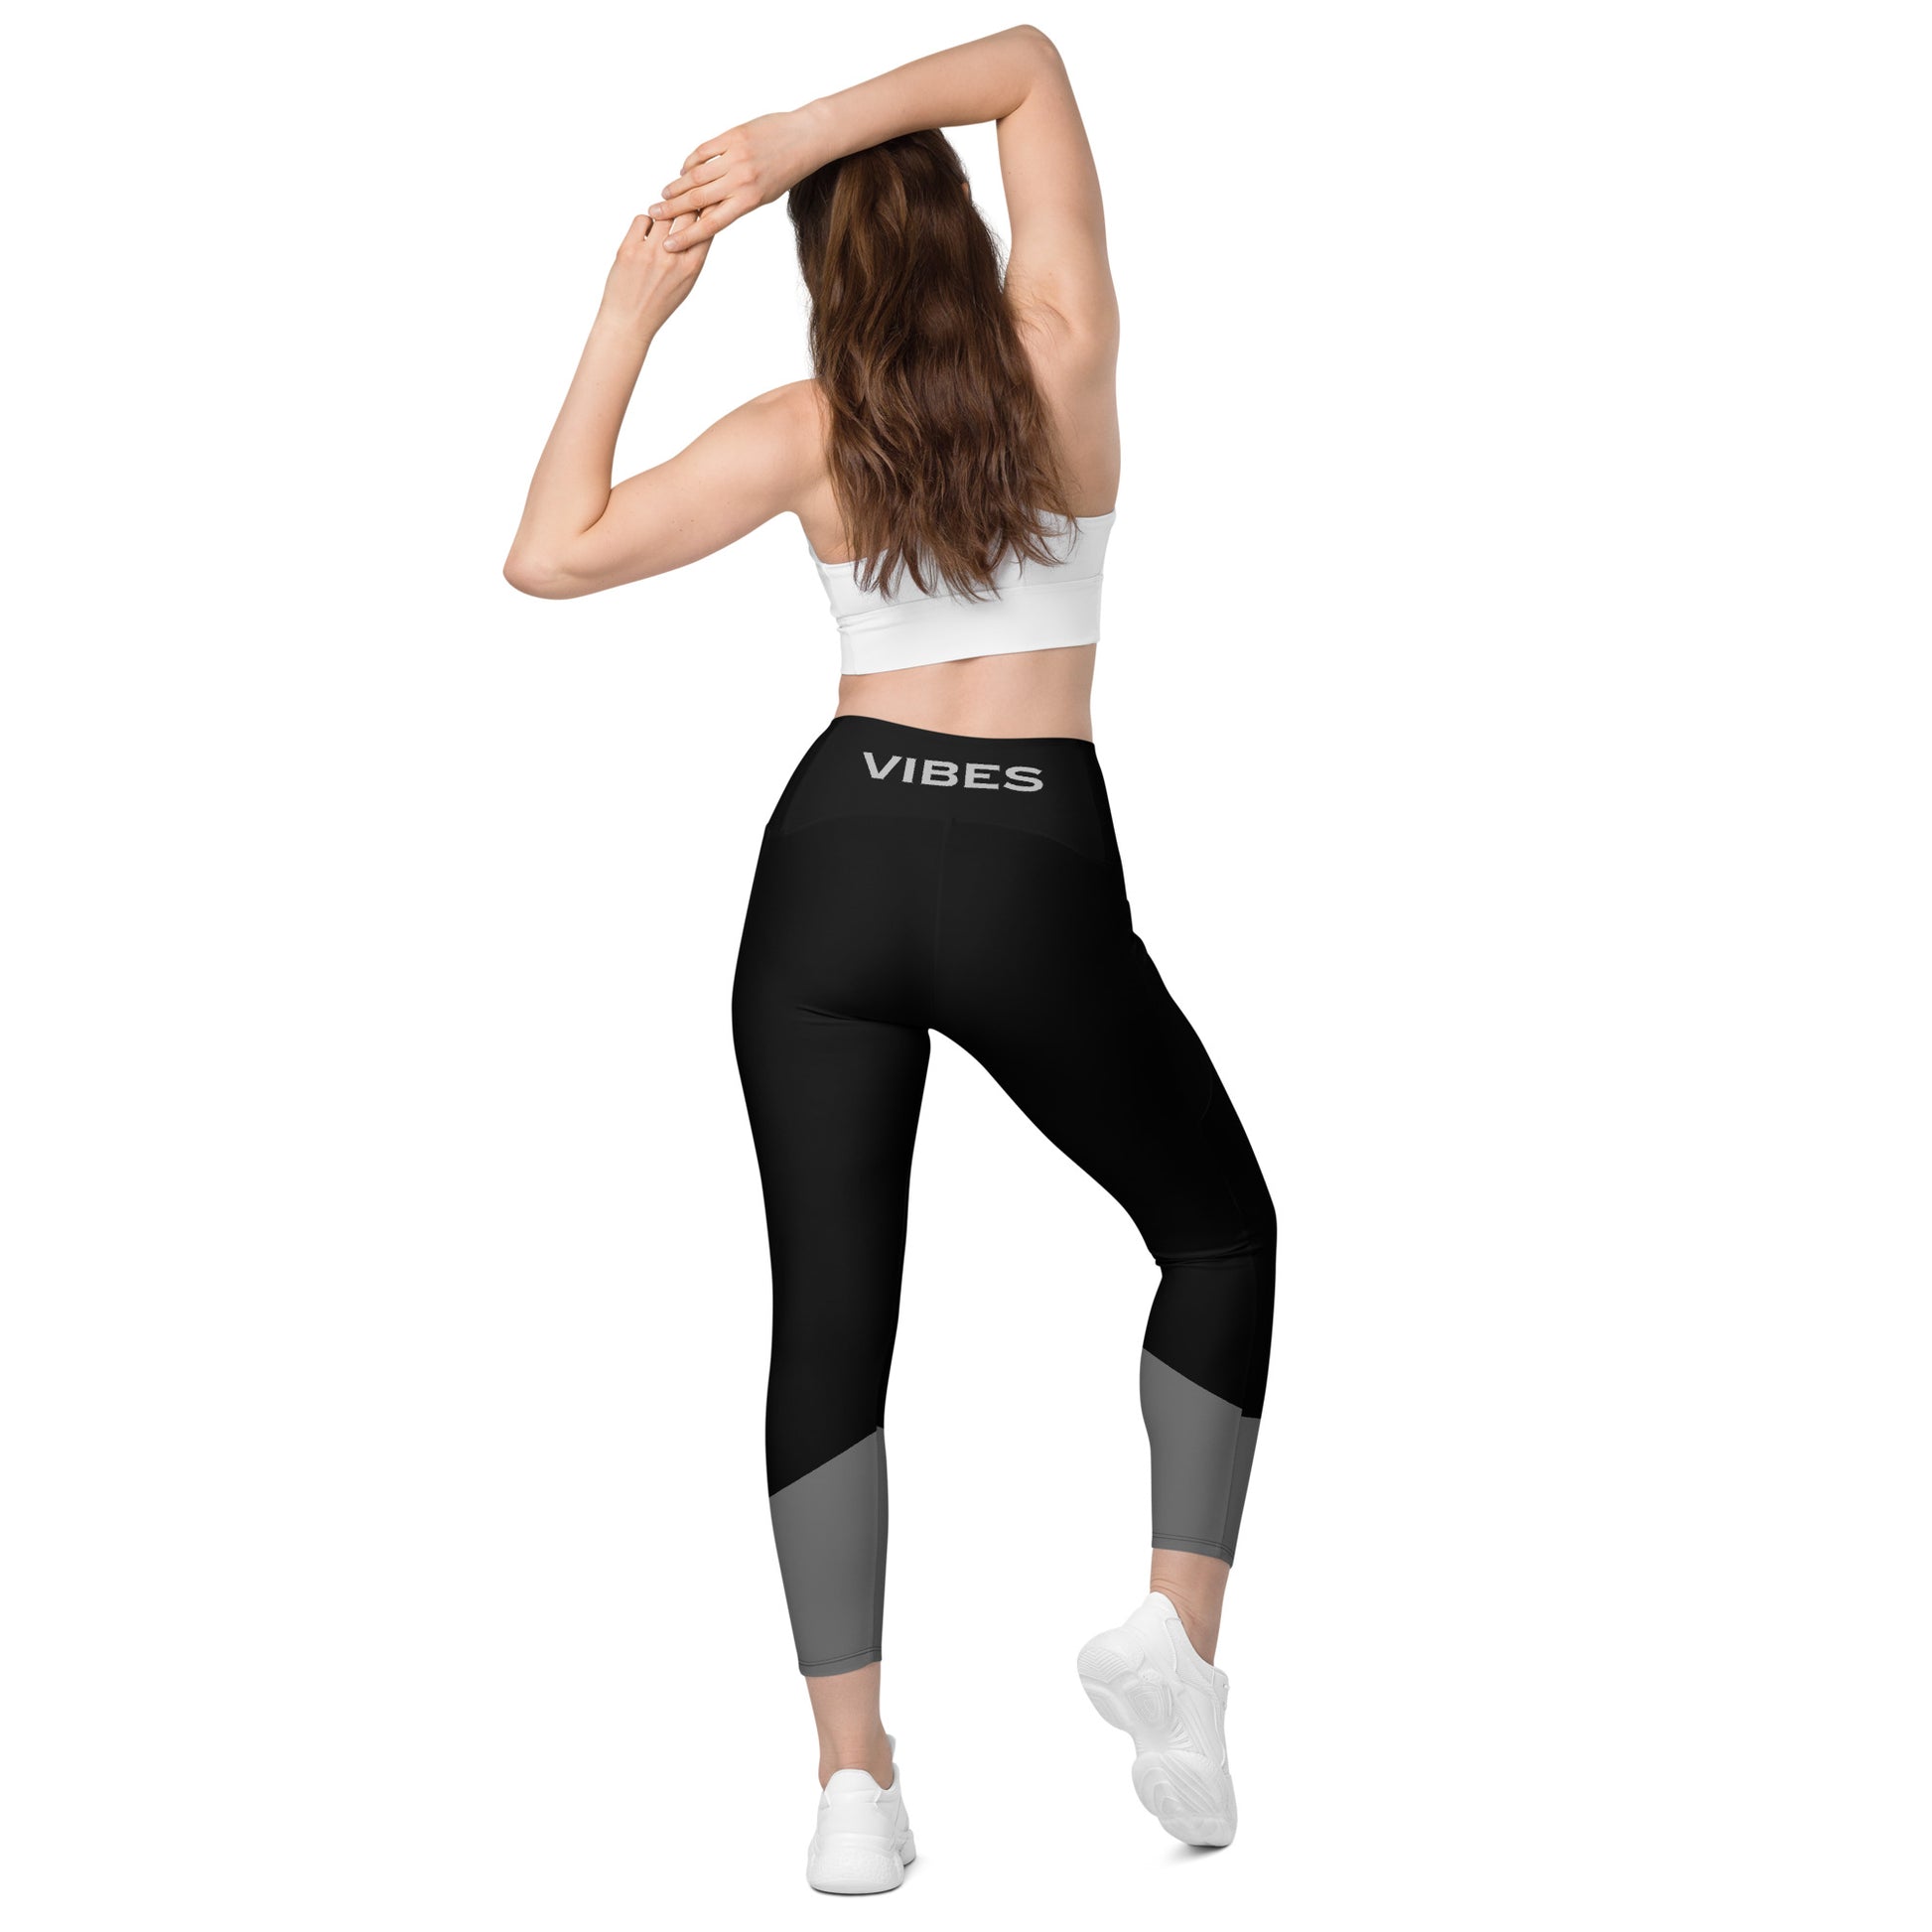 TIME OF VIBES - Leggings with pockets ABSTRACT (Black) - €59.00